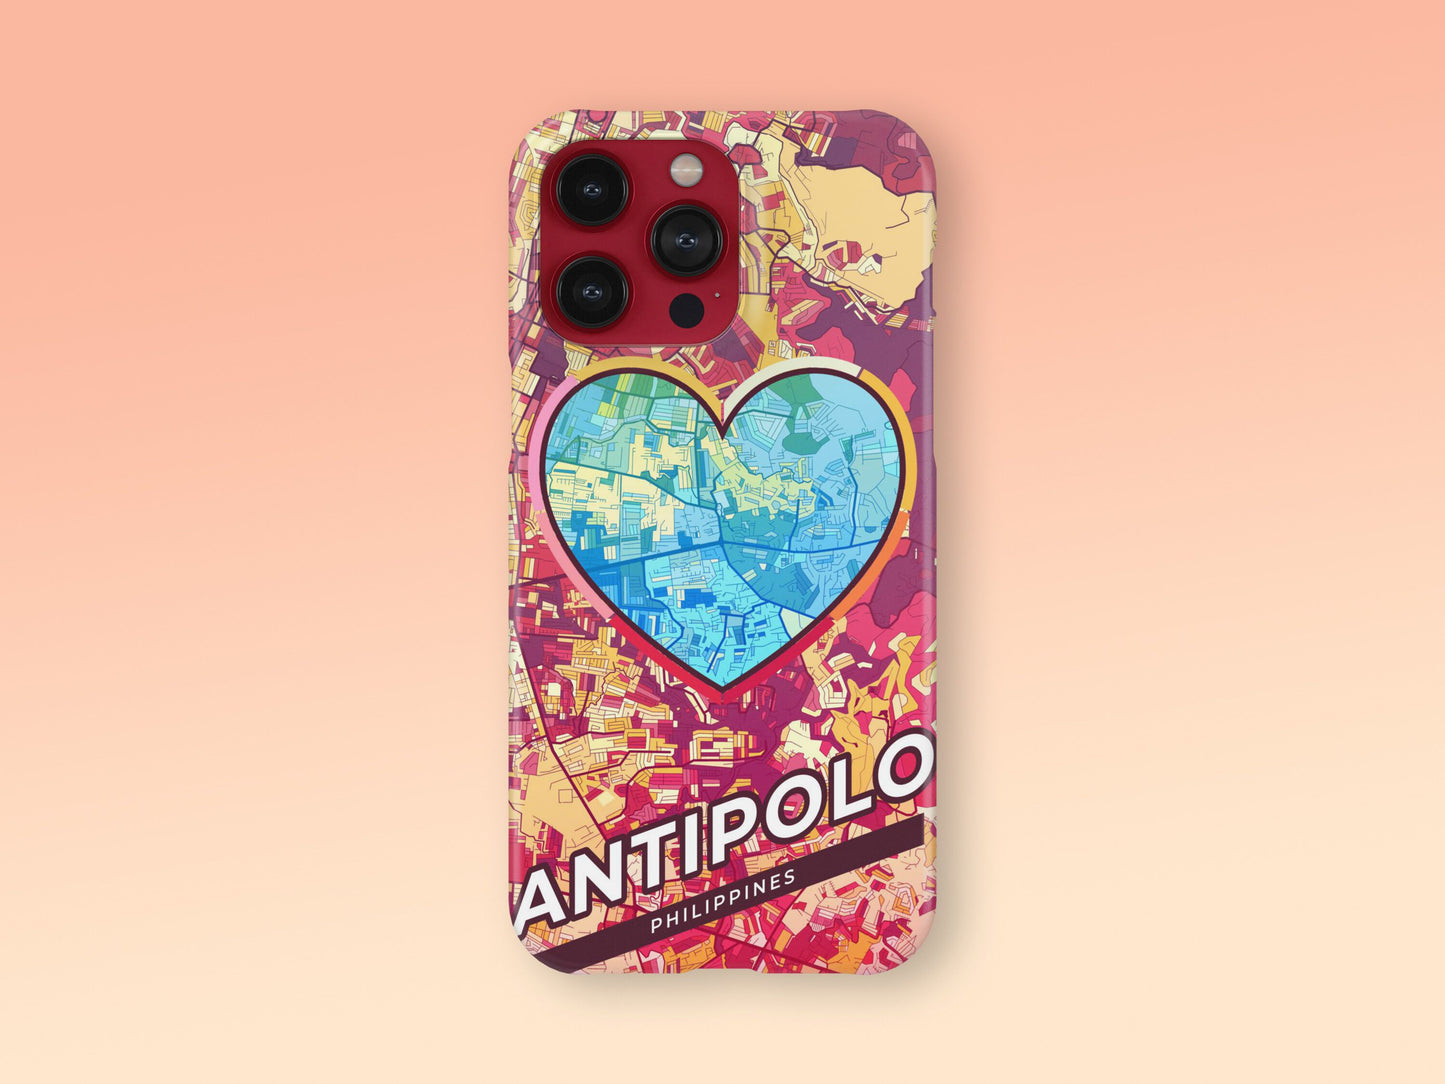 Antipolo Philippines slim phone case with colorful icon. Birthday, wedding or housewarming gift. Couple match cases. 2